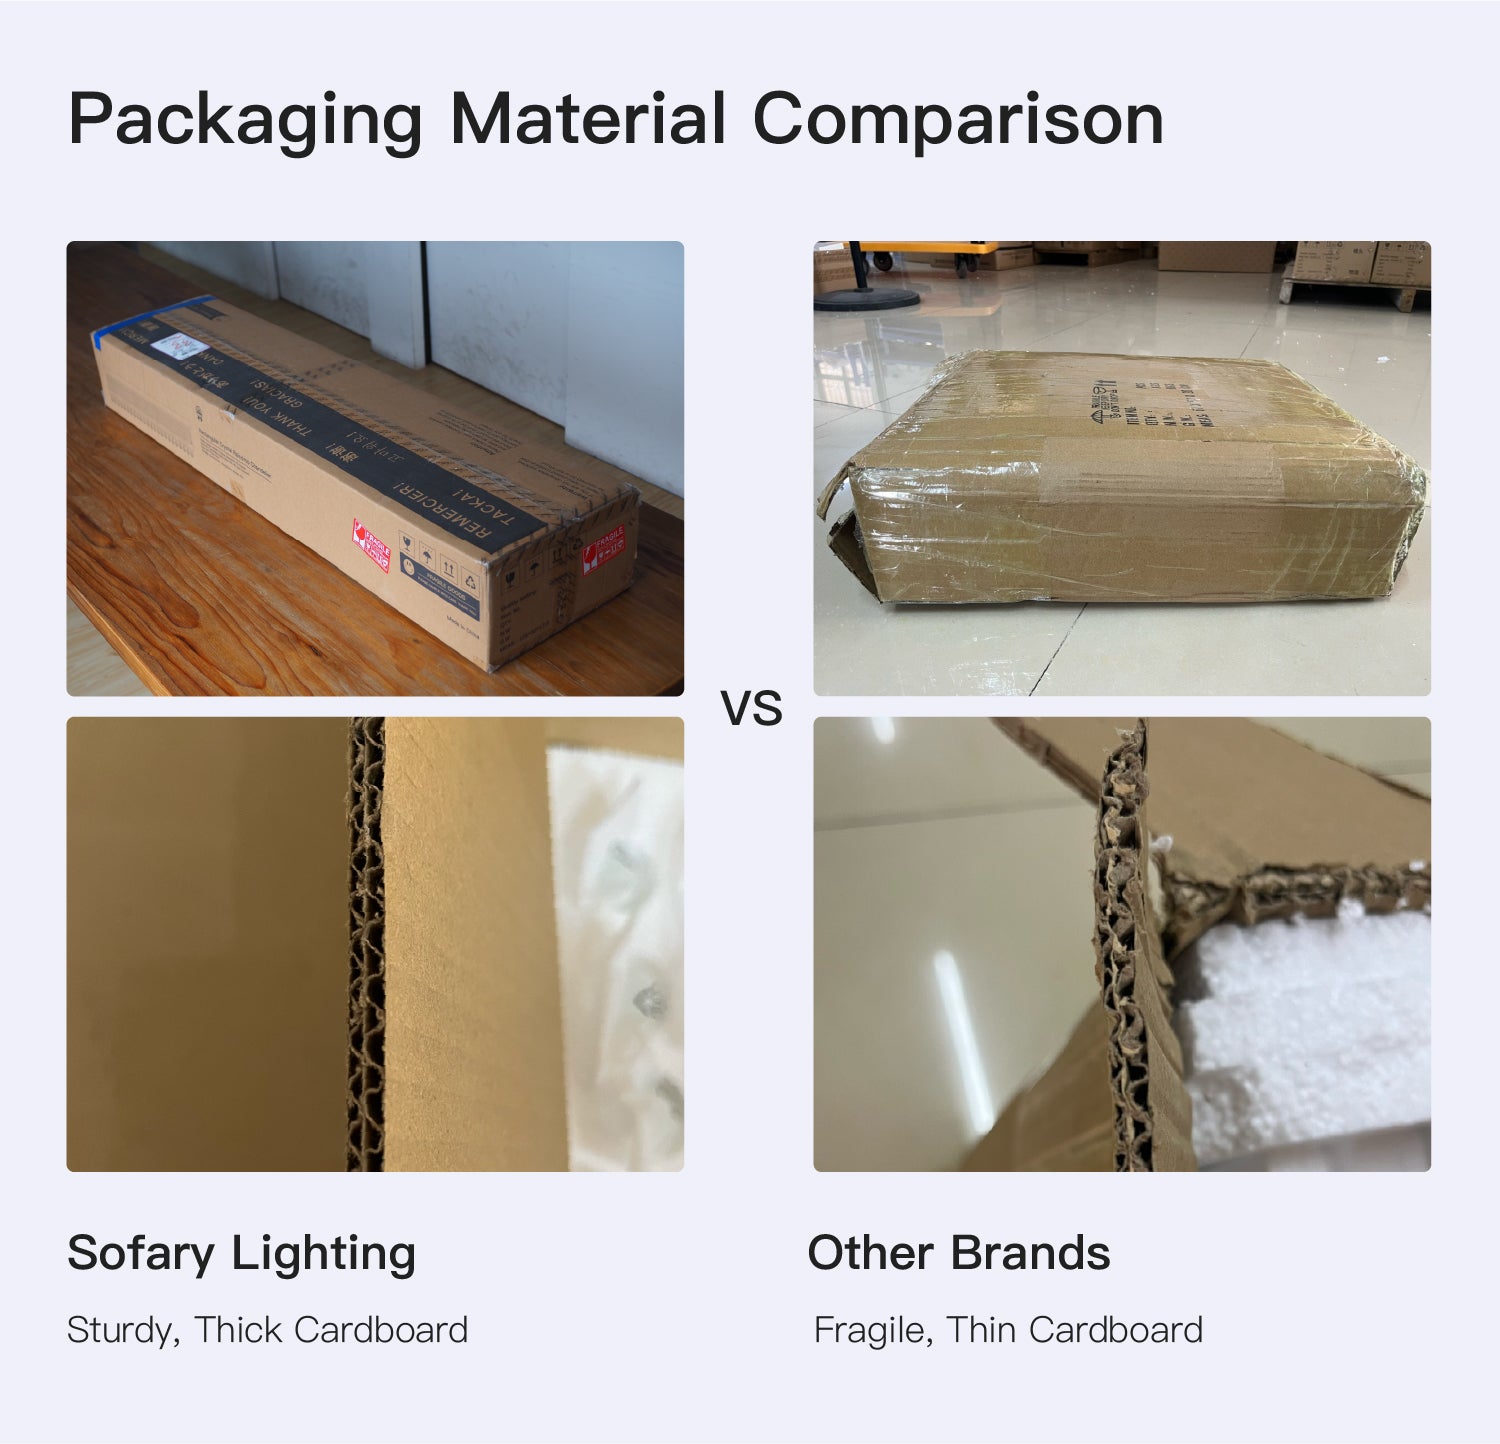 Packaging Material Comparison